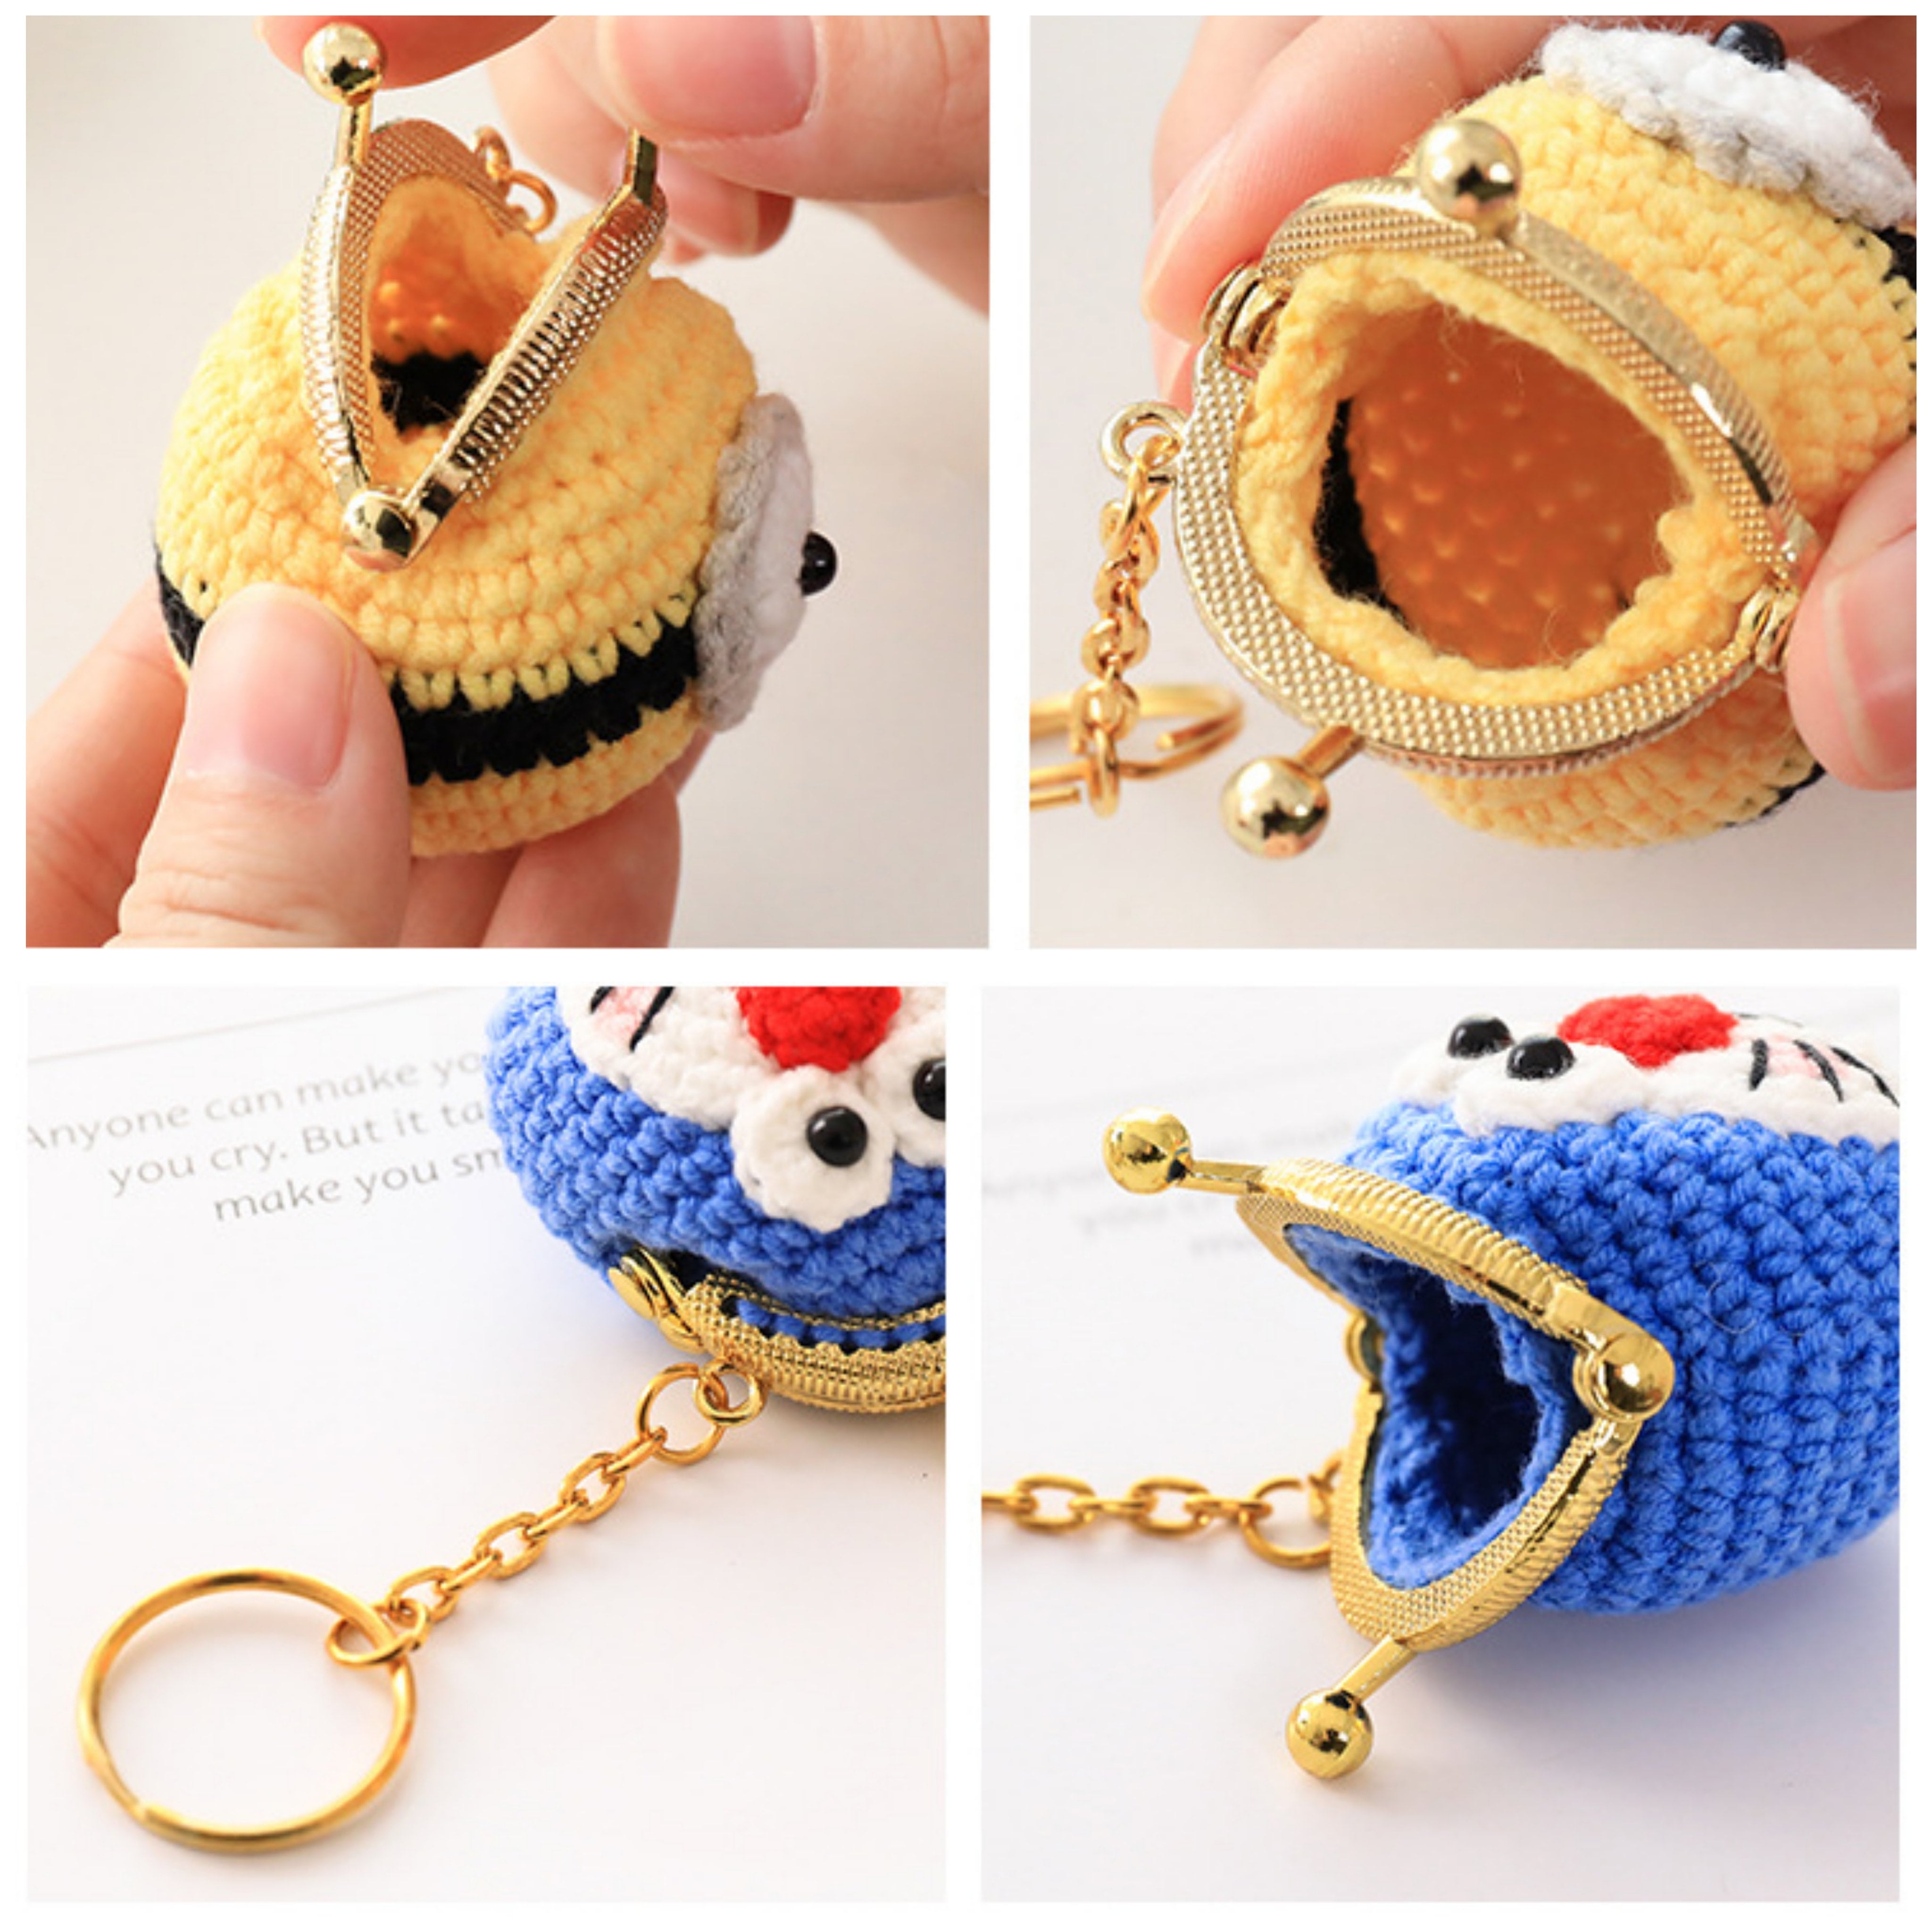 Sweet Nothings Crochet: MINION COIN PURSE